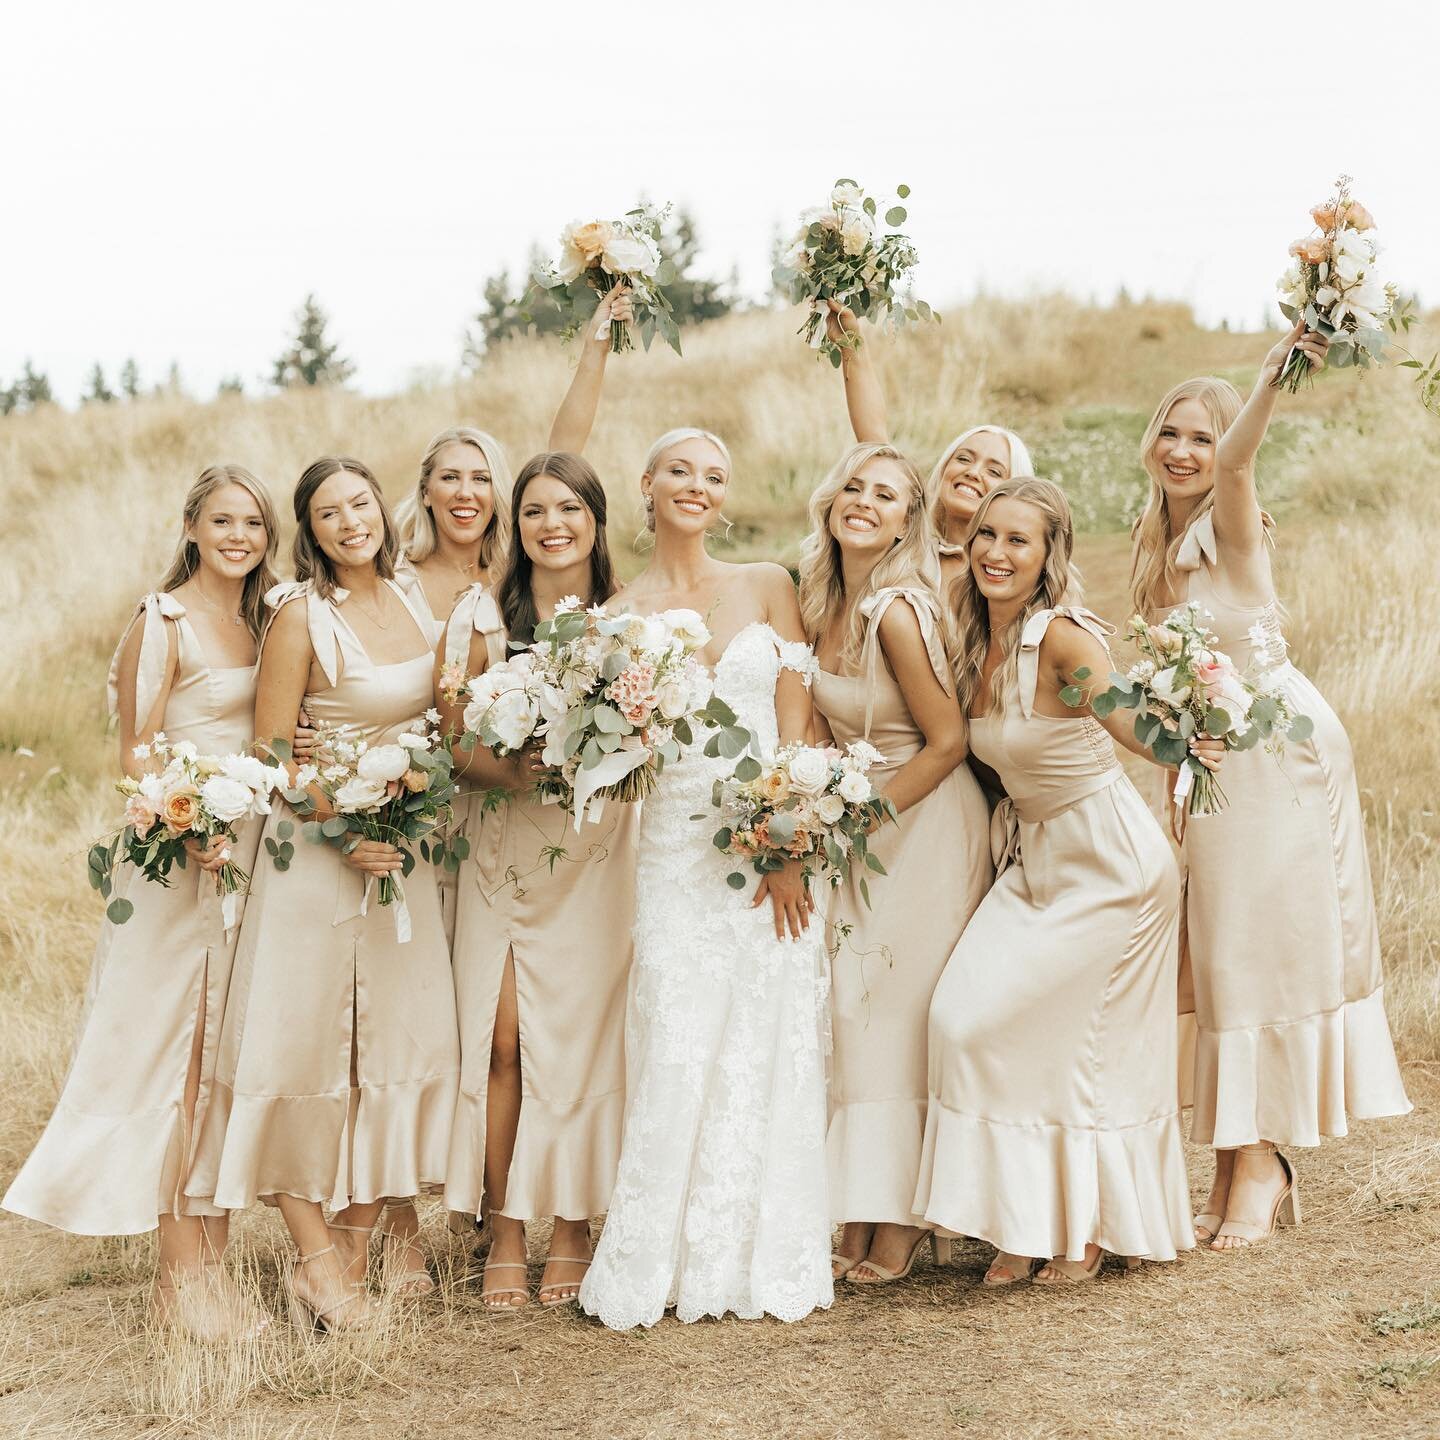 We are starting to get our photo galleries in from the 2021 wedding season and gorgeous photos like these make all the hard work worth it! Big shout out to my fantastic team that helped put this unforgettable day together! @herflowerjournal @beallpai